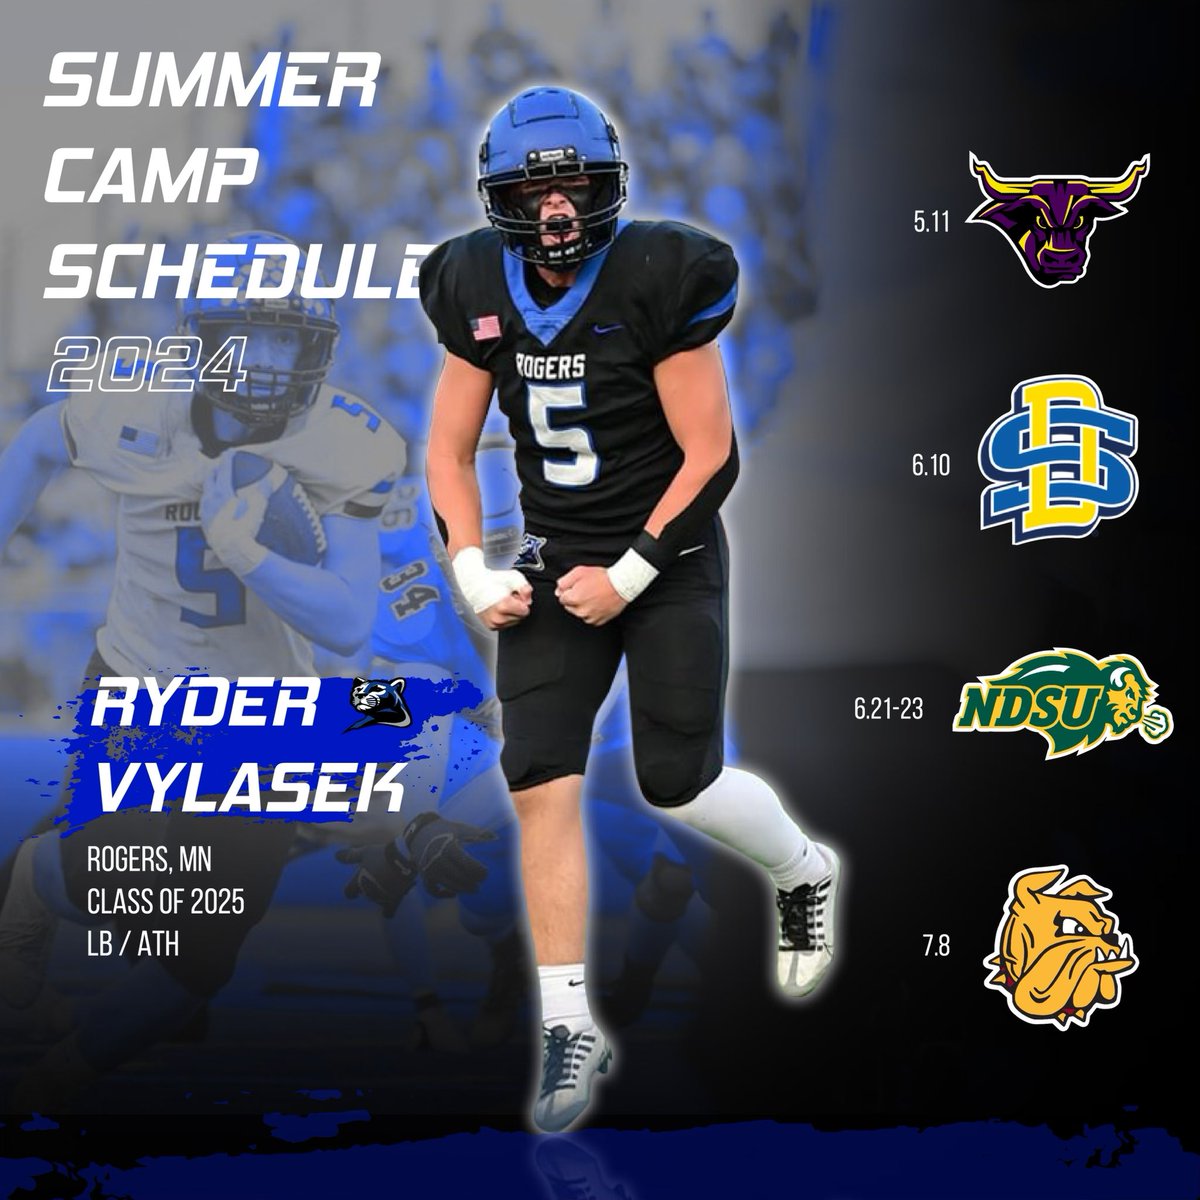 Camp season right around the corner, here are the camps I am signed up for as of now! Come check me out‼️ @MinnStFootball @GoJacksFB @NDSUfootball @UMD_Football @Todd_Taylor28 @CoachMeyersSDSU @SDSURogers3 @CoachOlsonNDSU @JamoBrown_ @Coach_Dill @CoachLukeOlson @RogersRoyalsFB